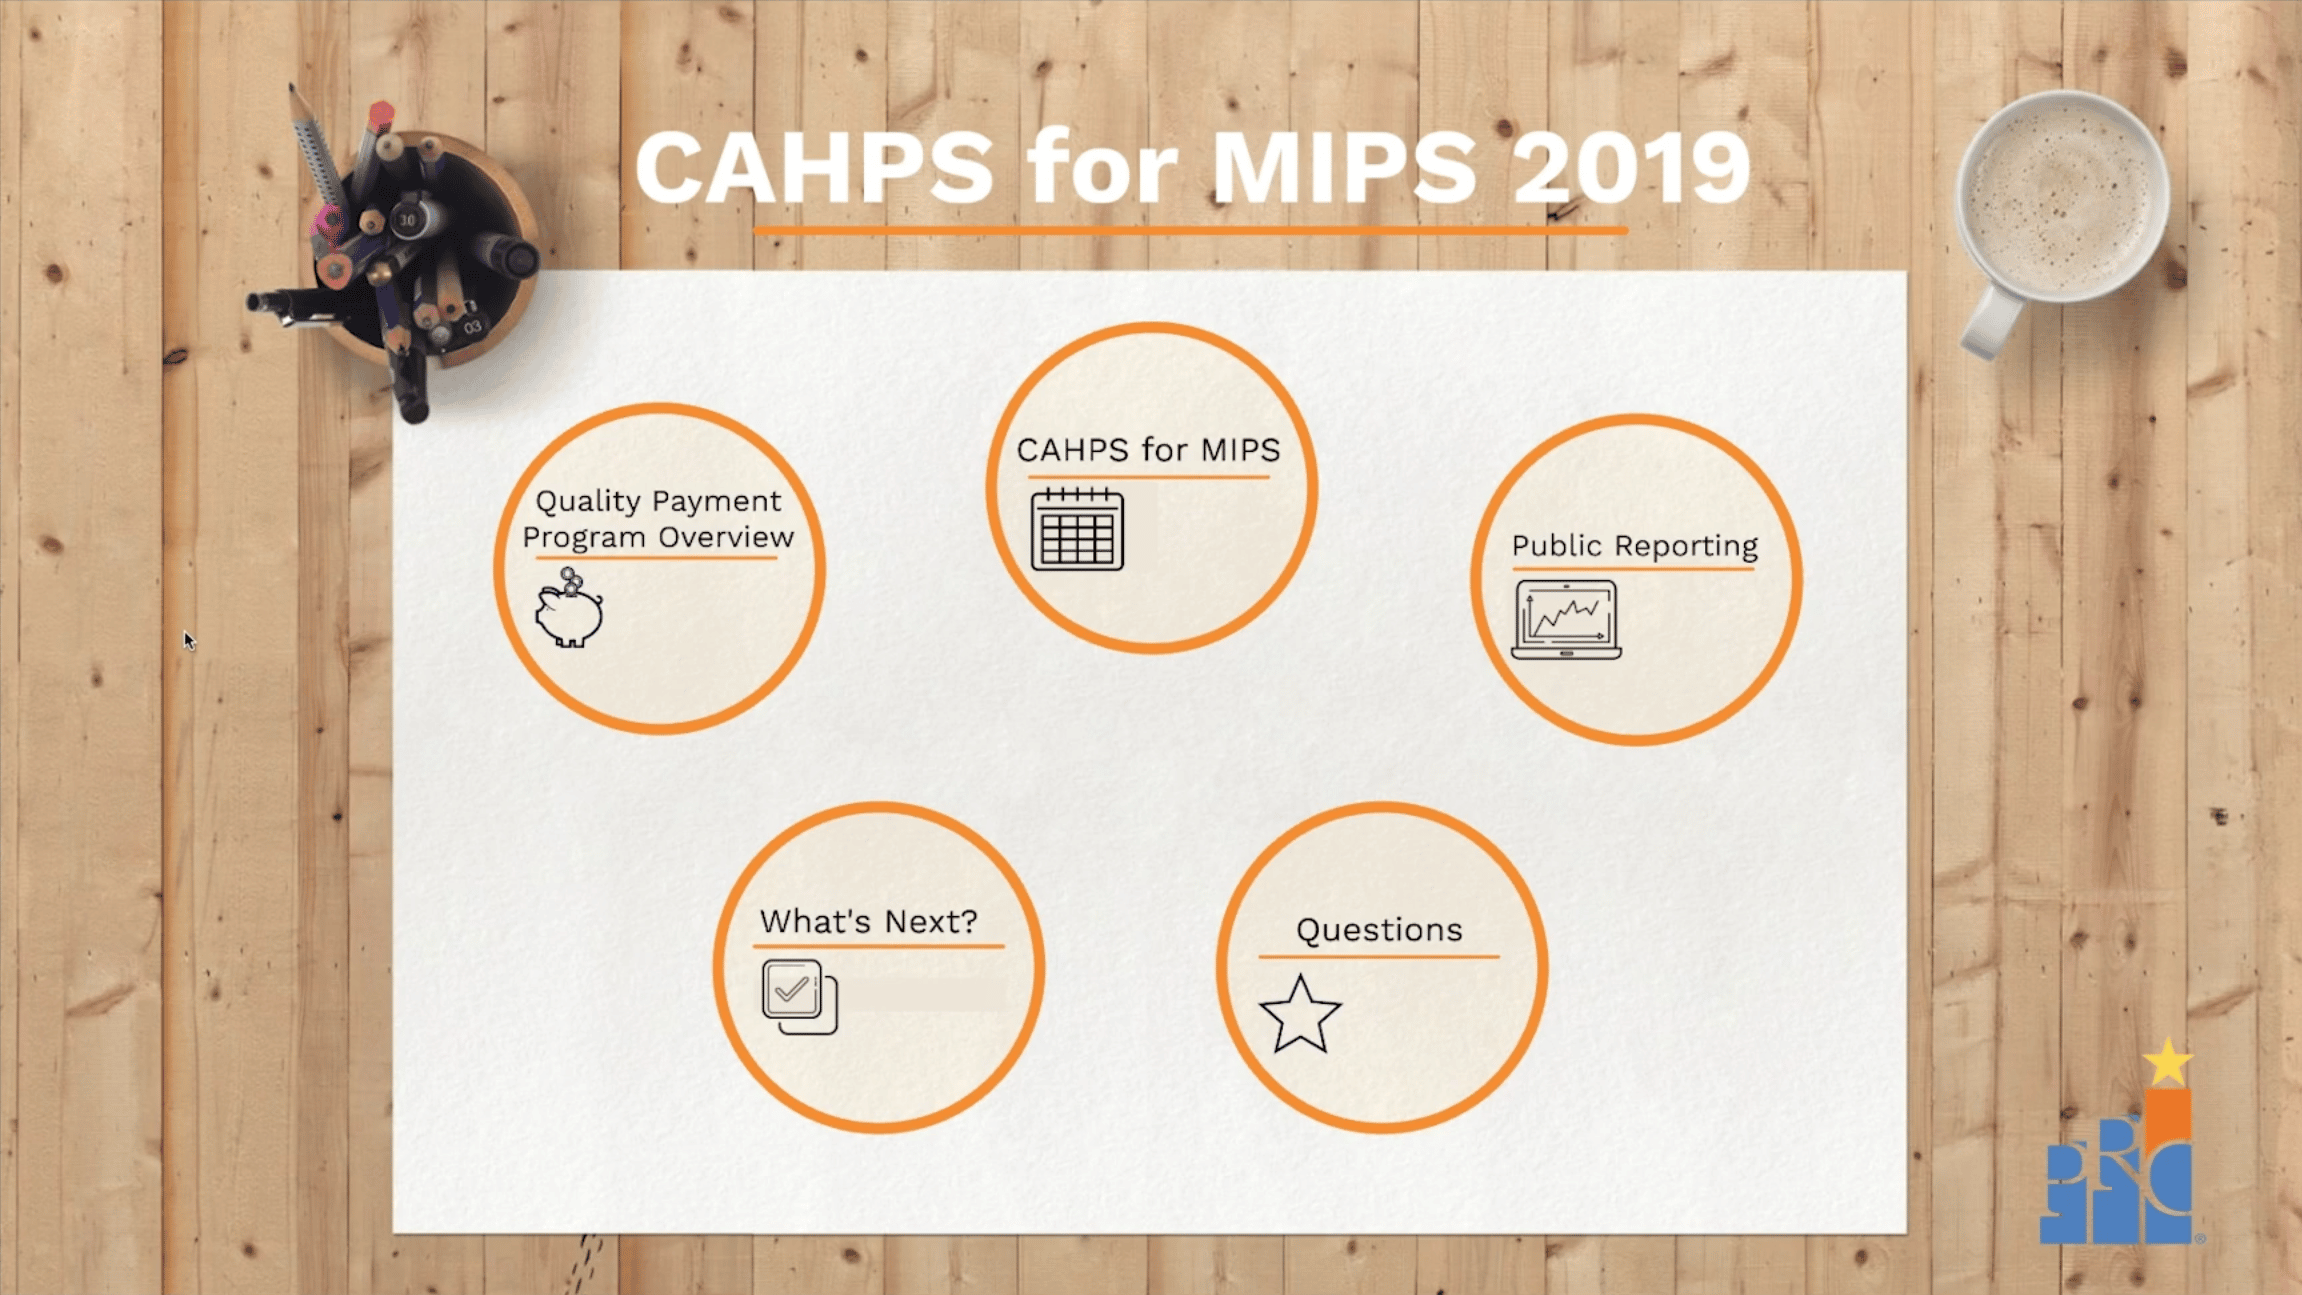 Landscape paper on a wooden desk with pencils, coffee, and CAHPS for MIPS 2019 information